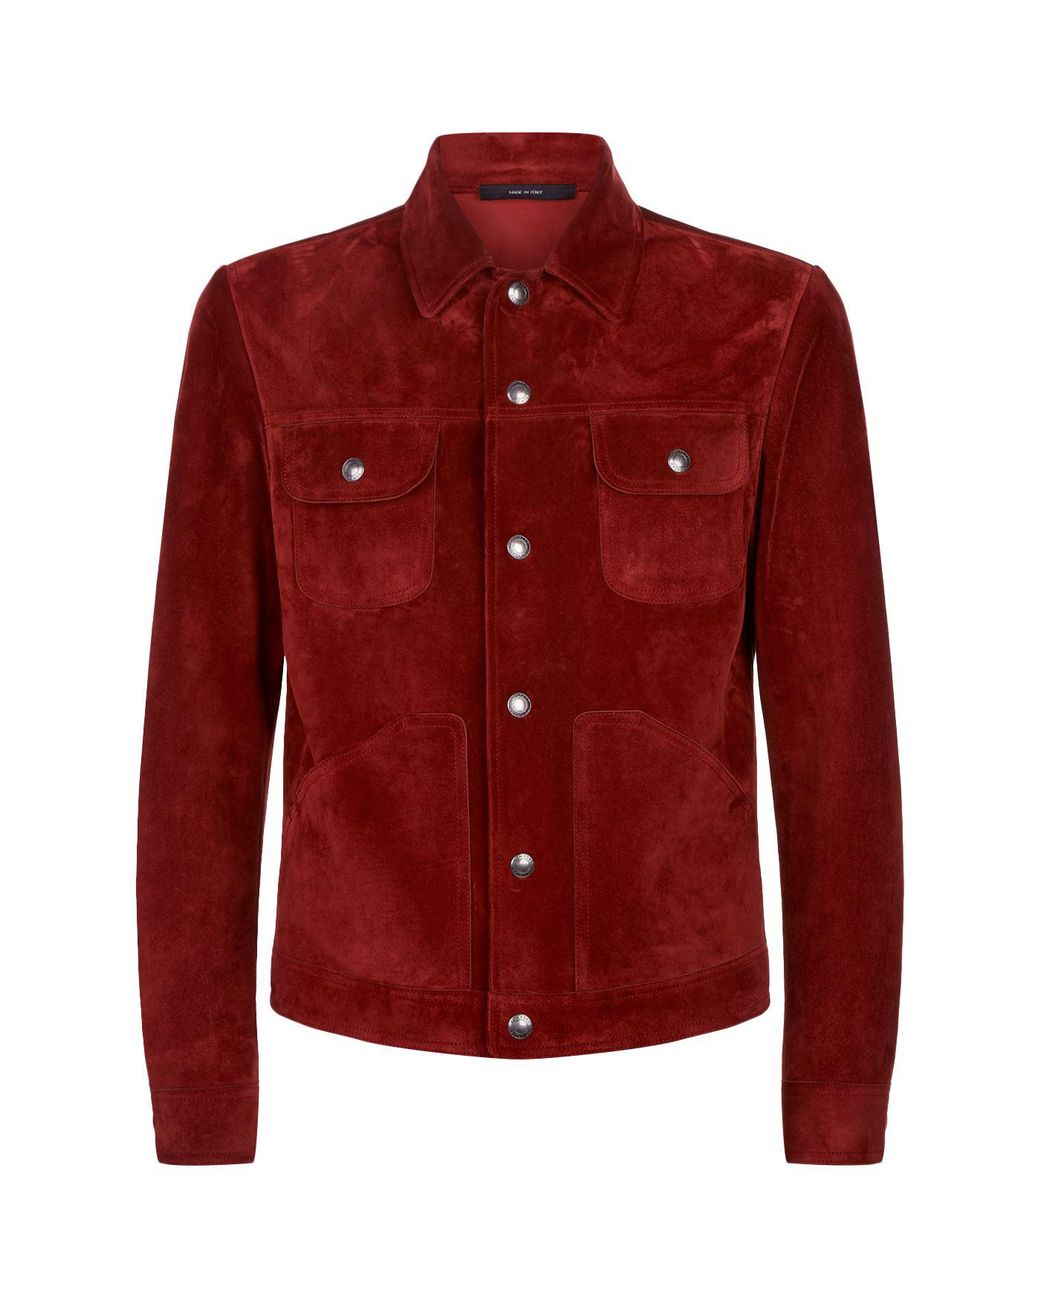 Tom Ford Suede Trucker Jacket in Red for Men | Lyst